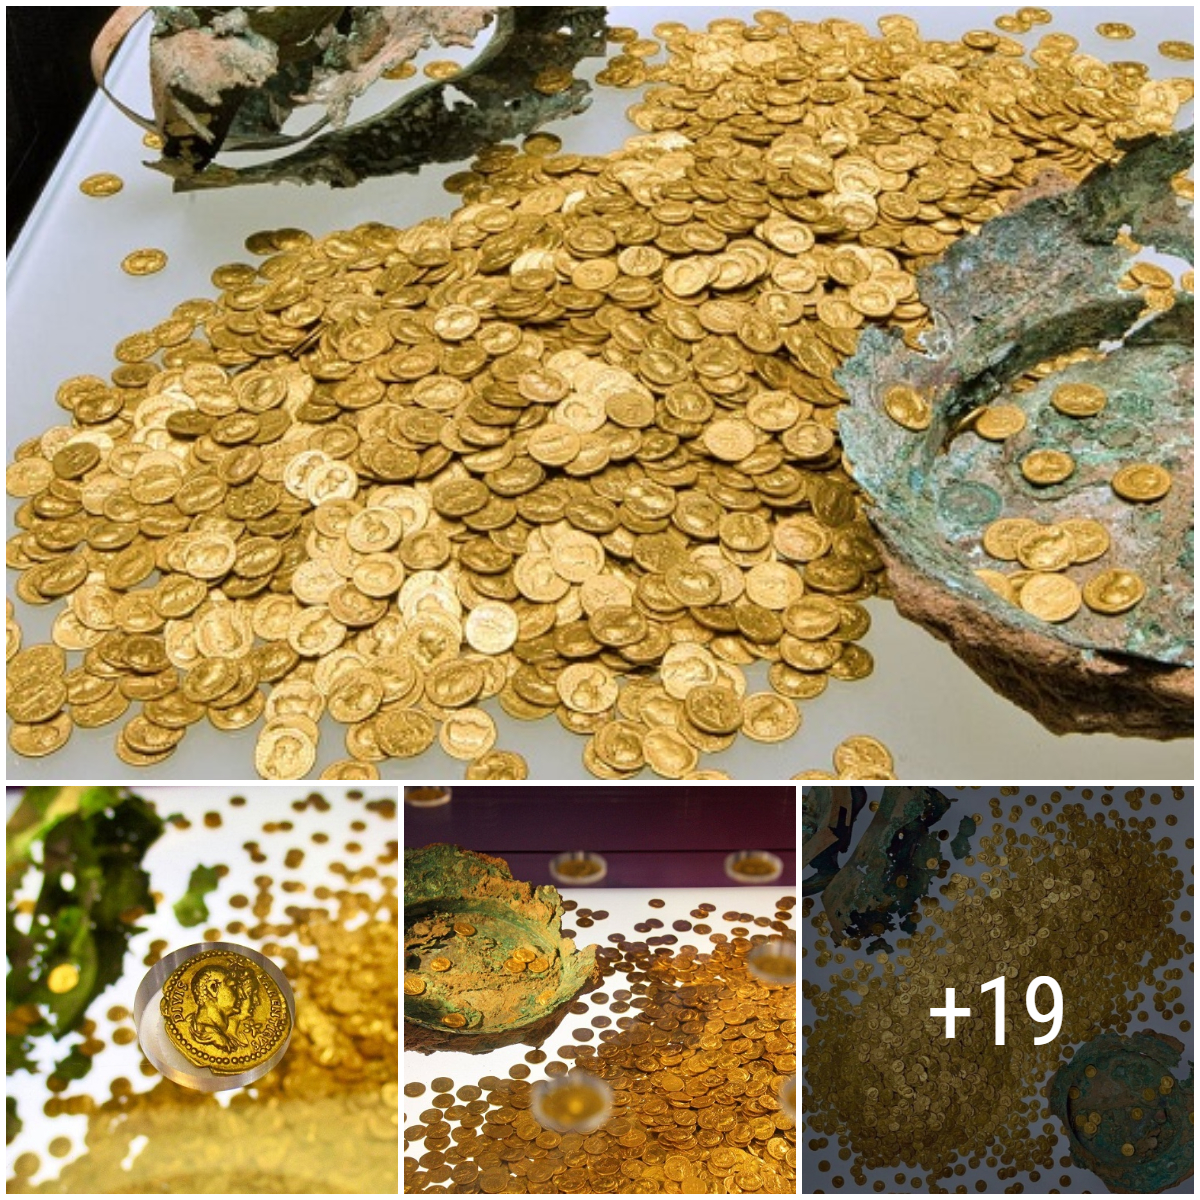 Ancient Treasures Revealed: 1,800-Year-Old Cave Unveils 265,000 Gold Pieces